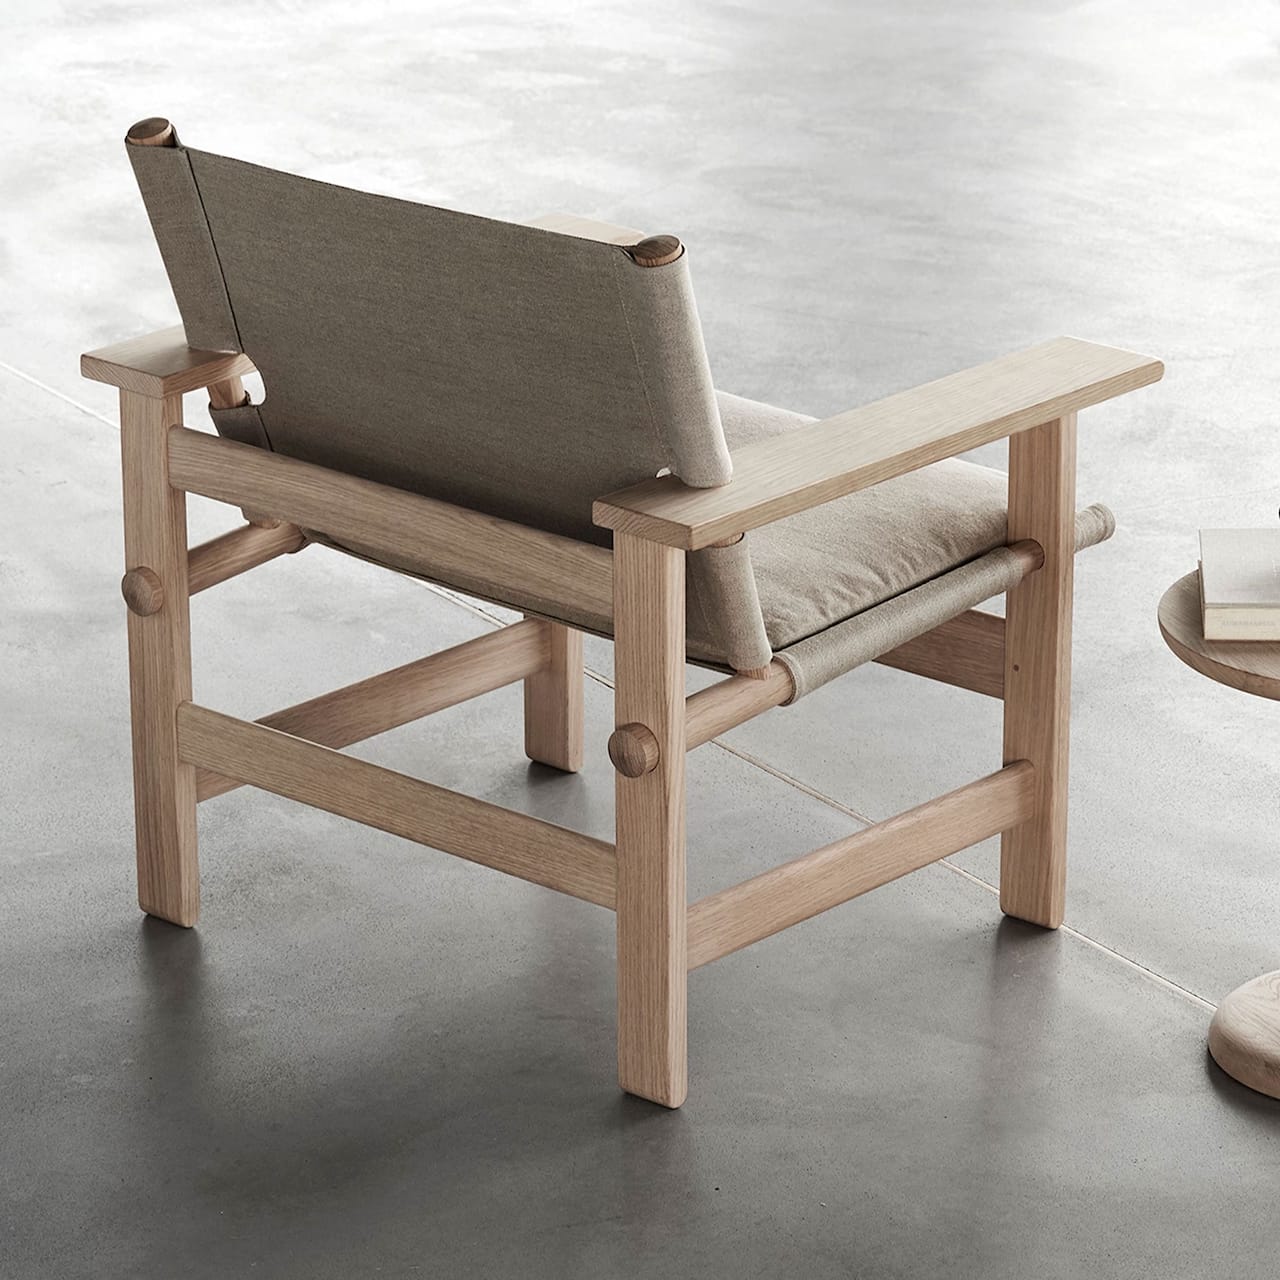 The Canvas Chair - Med pute